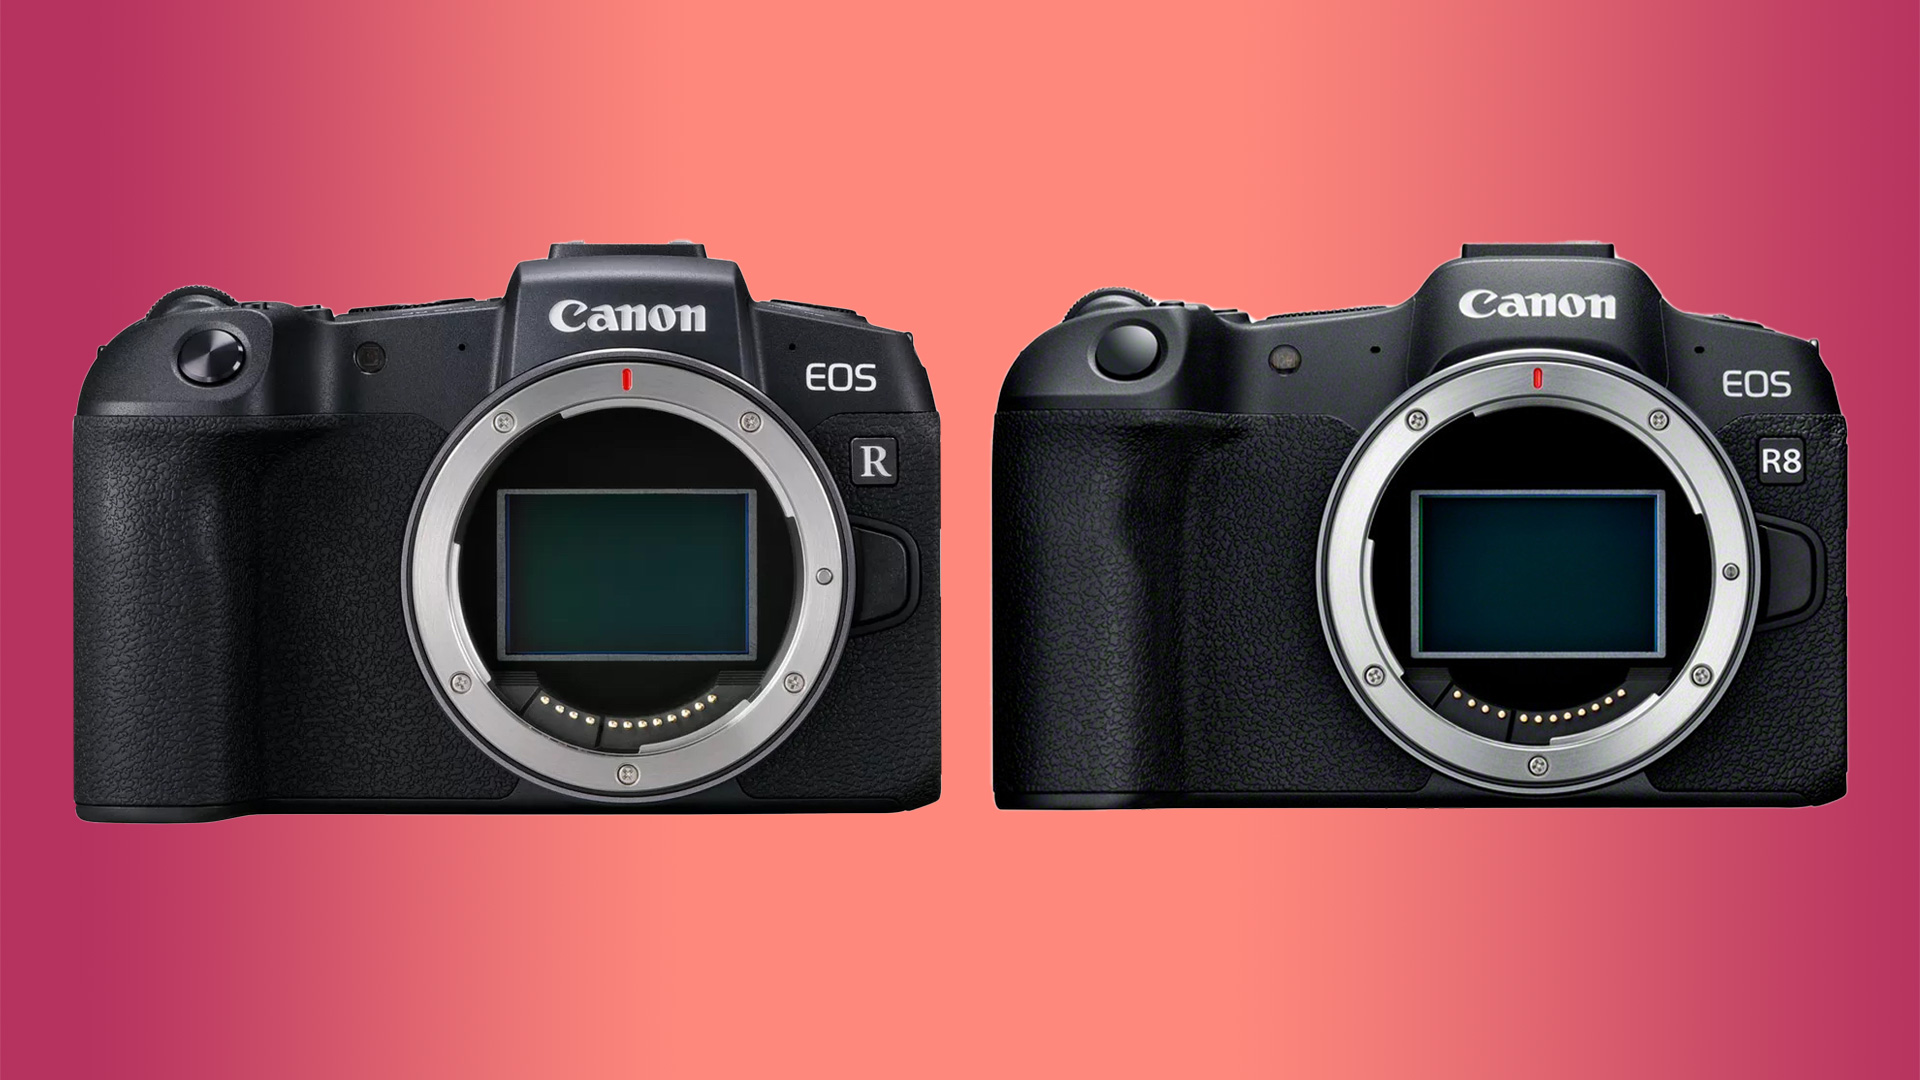 Canon R8 vs RP: the new EOS R8 or old EOS RP which is best for you?